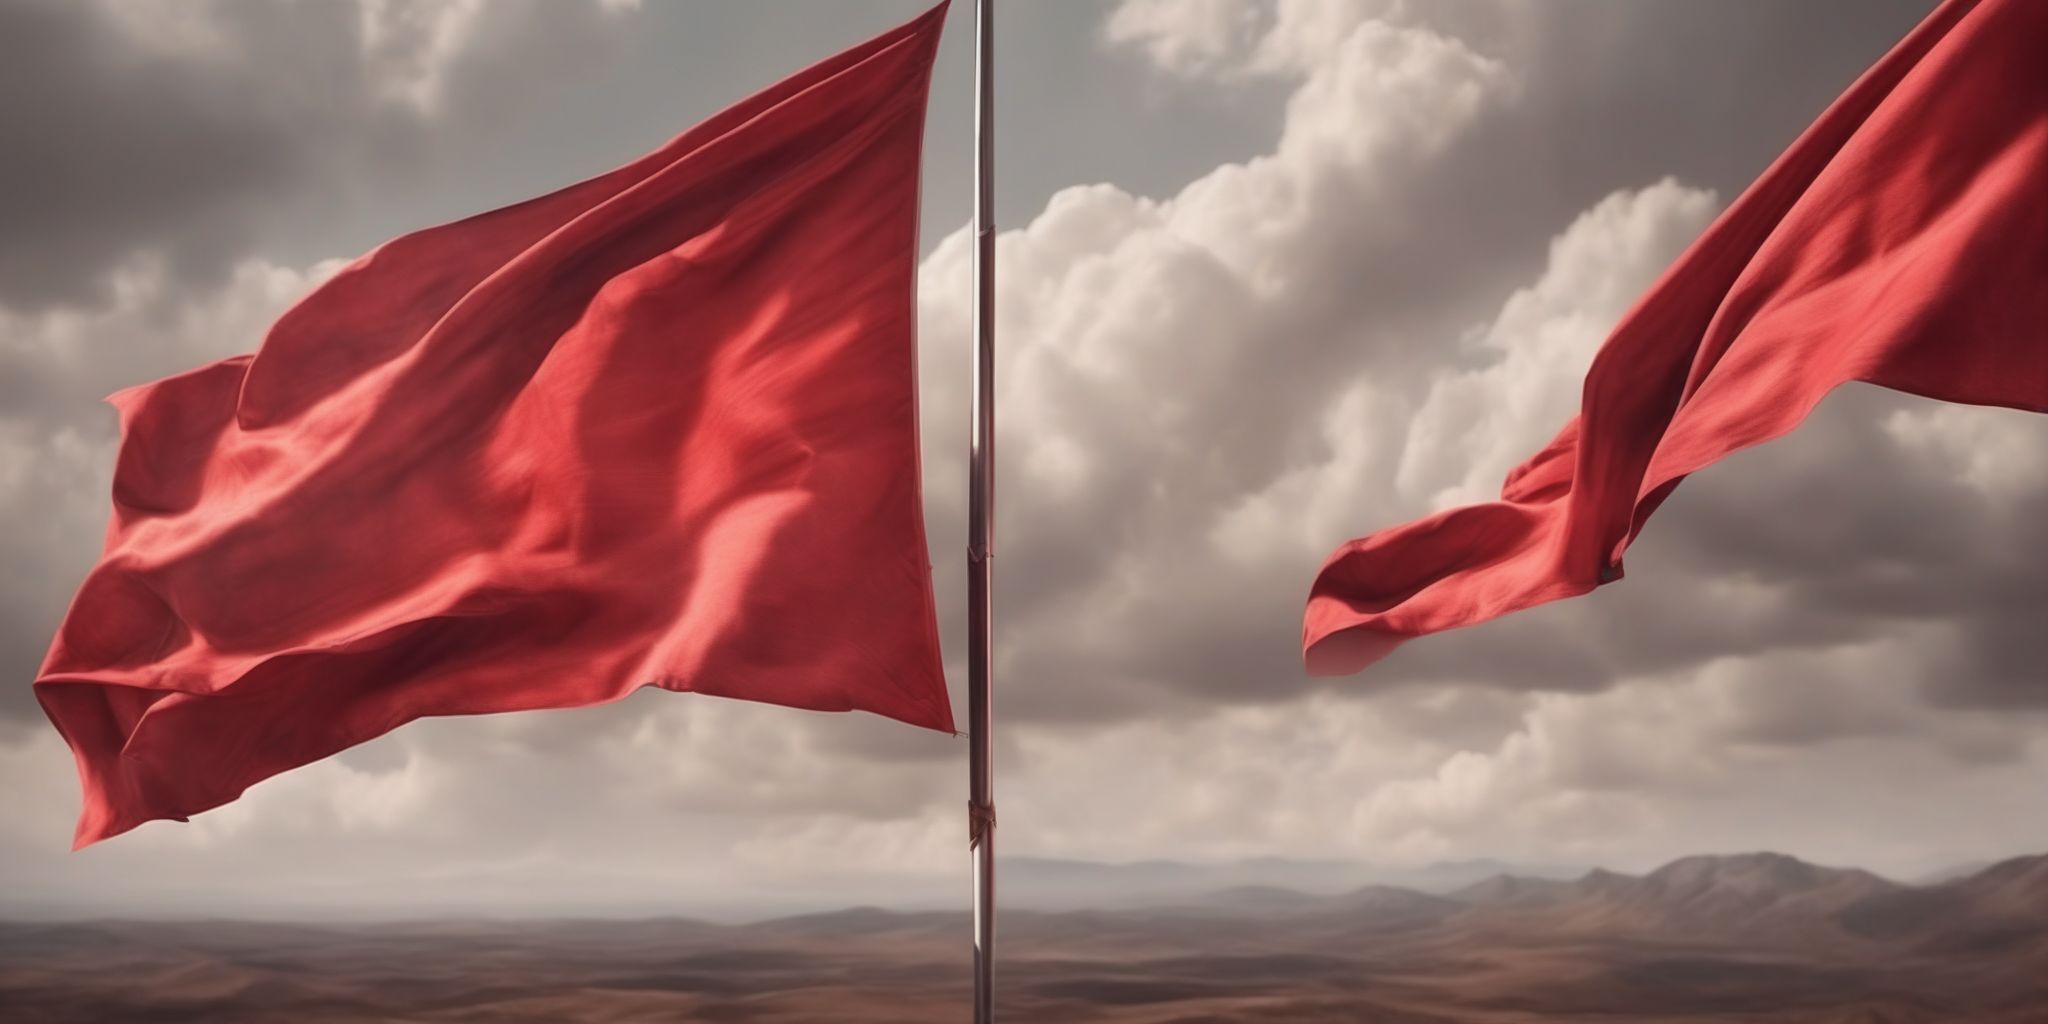 Red flag  in realistic, photographic style